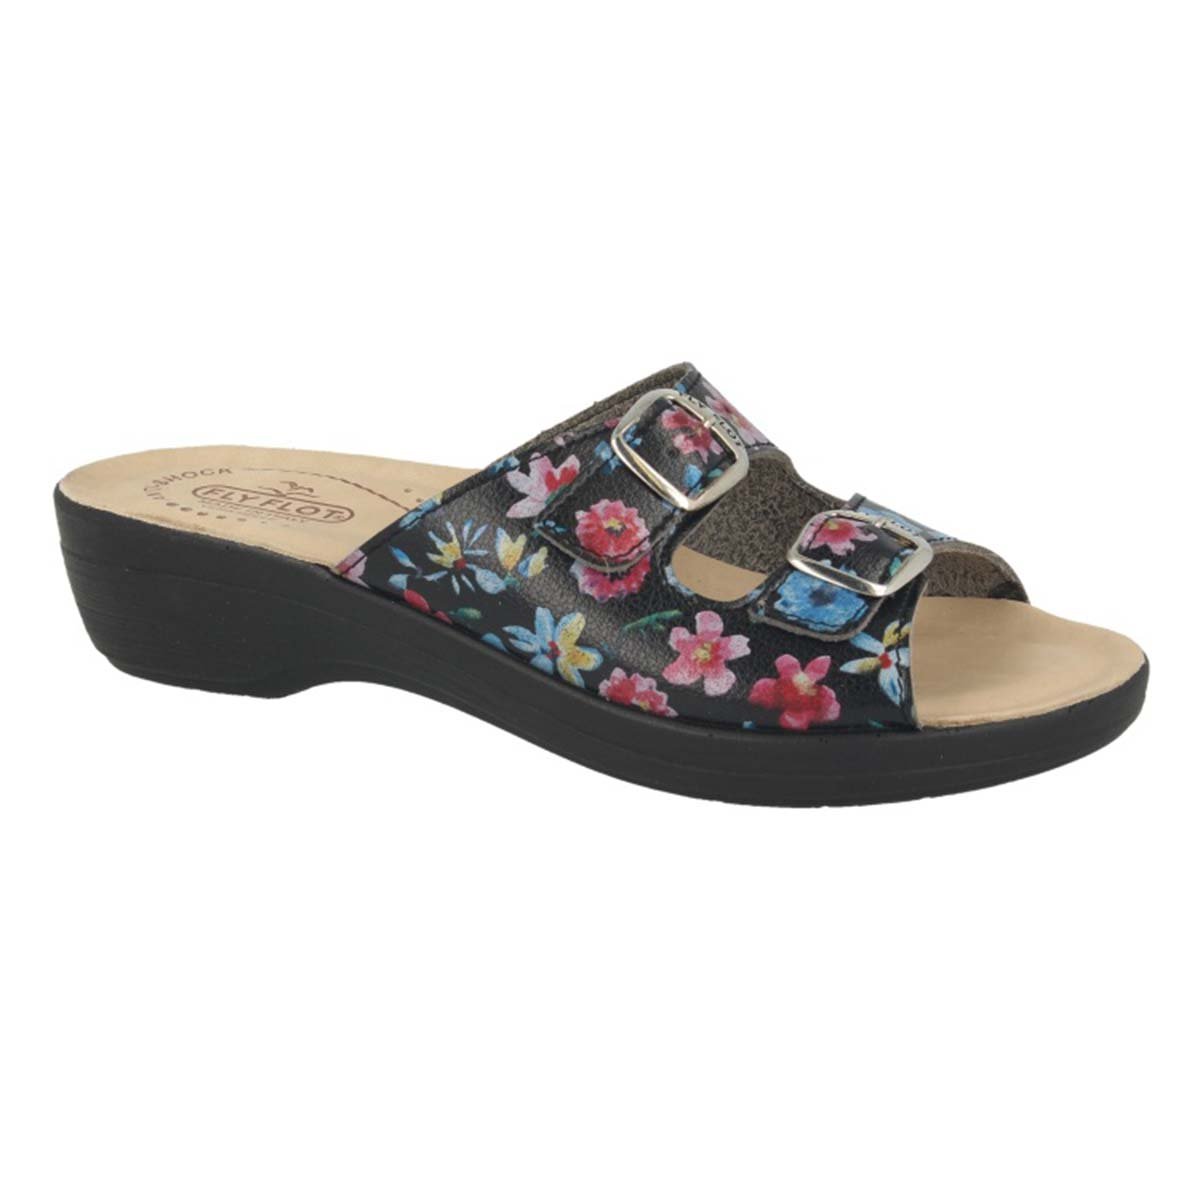 See photos Synthetic Woman Slipper Black (T5D8964)